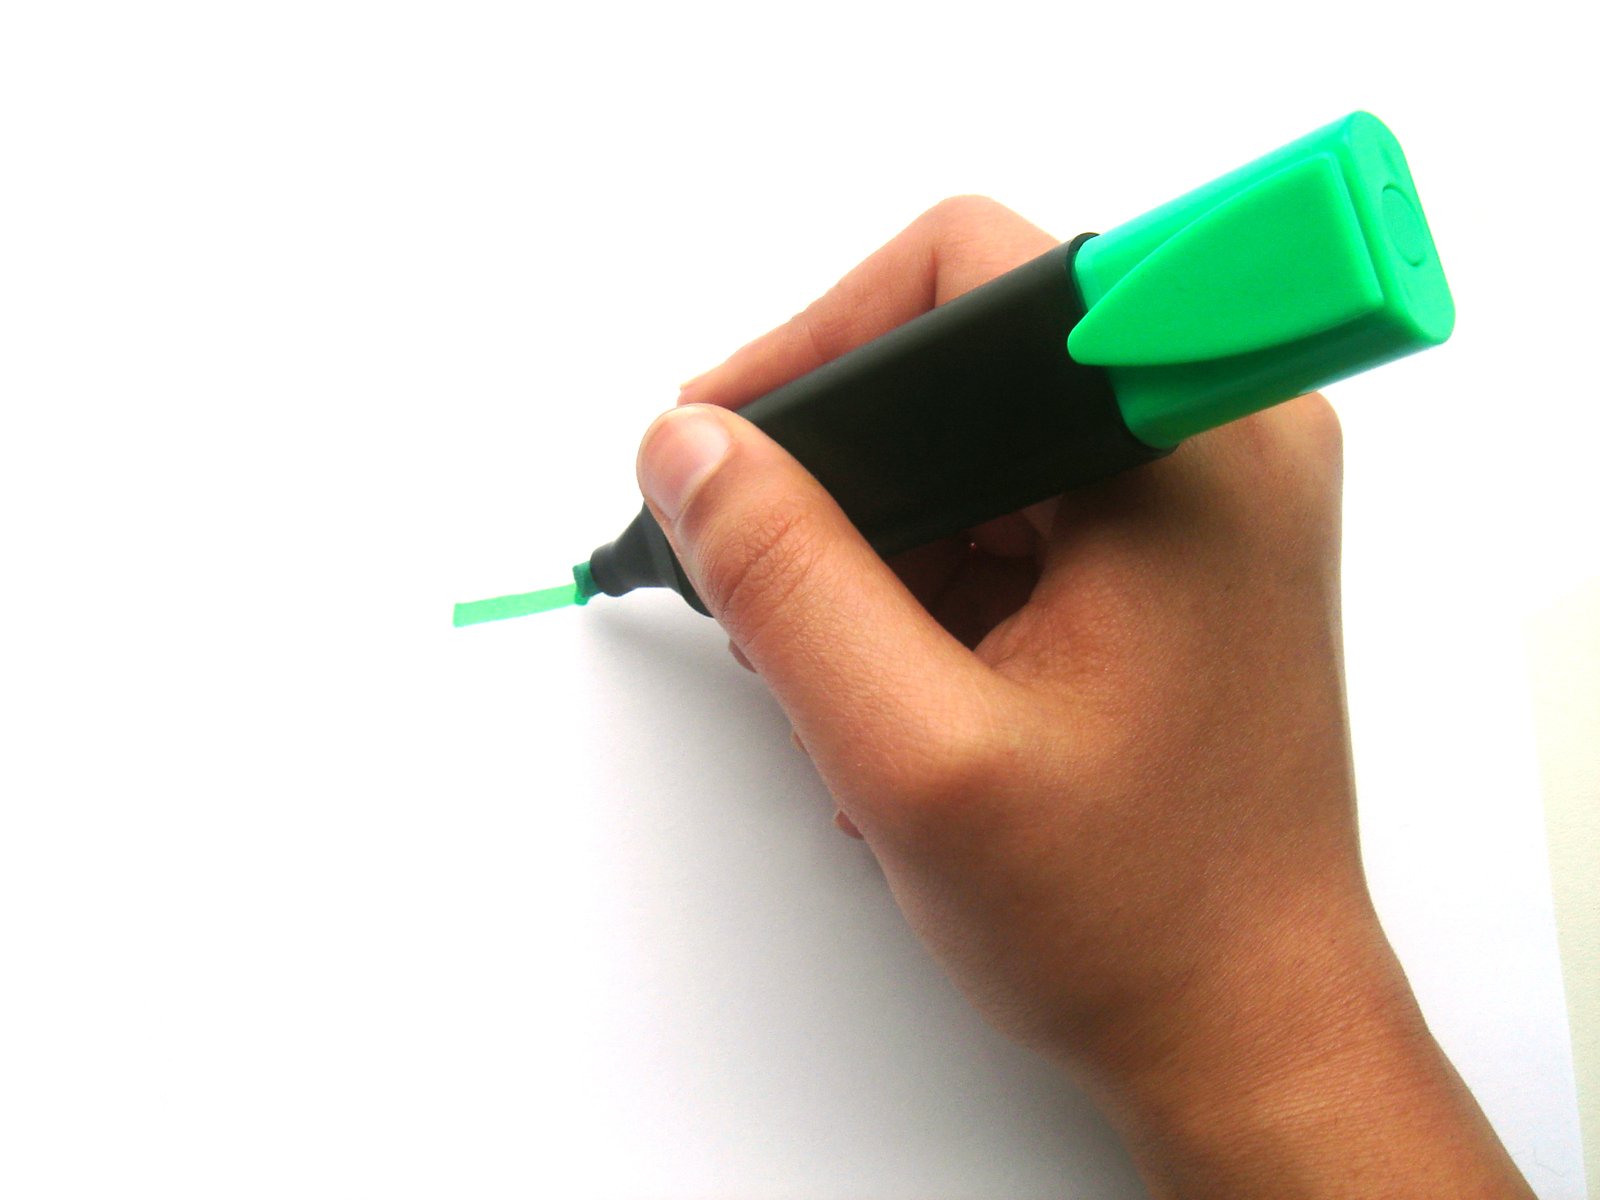 a person writing on paper with a pen